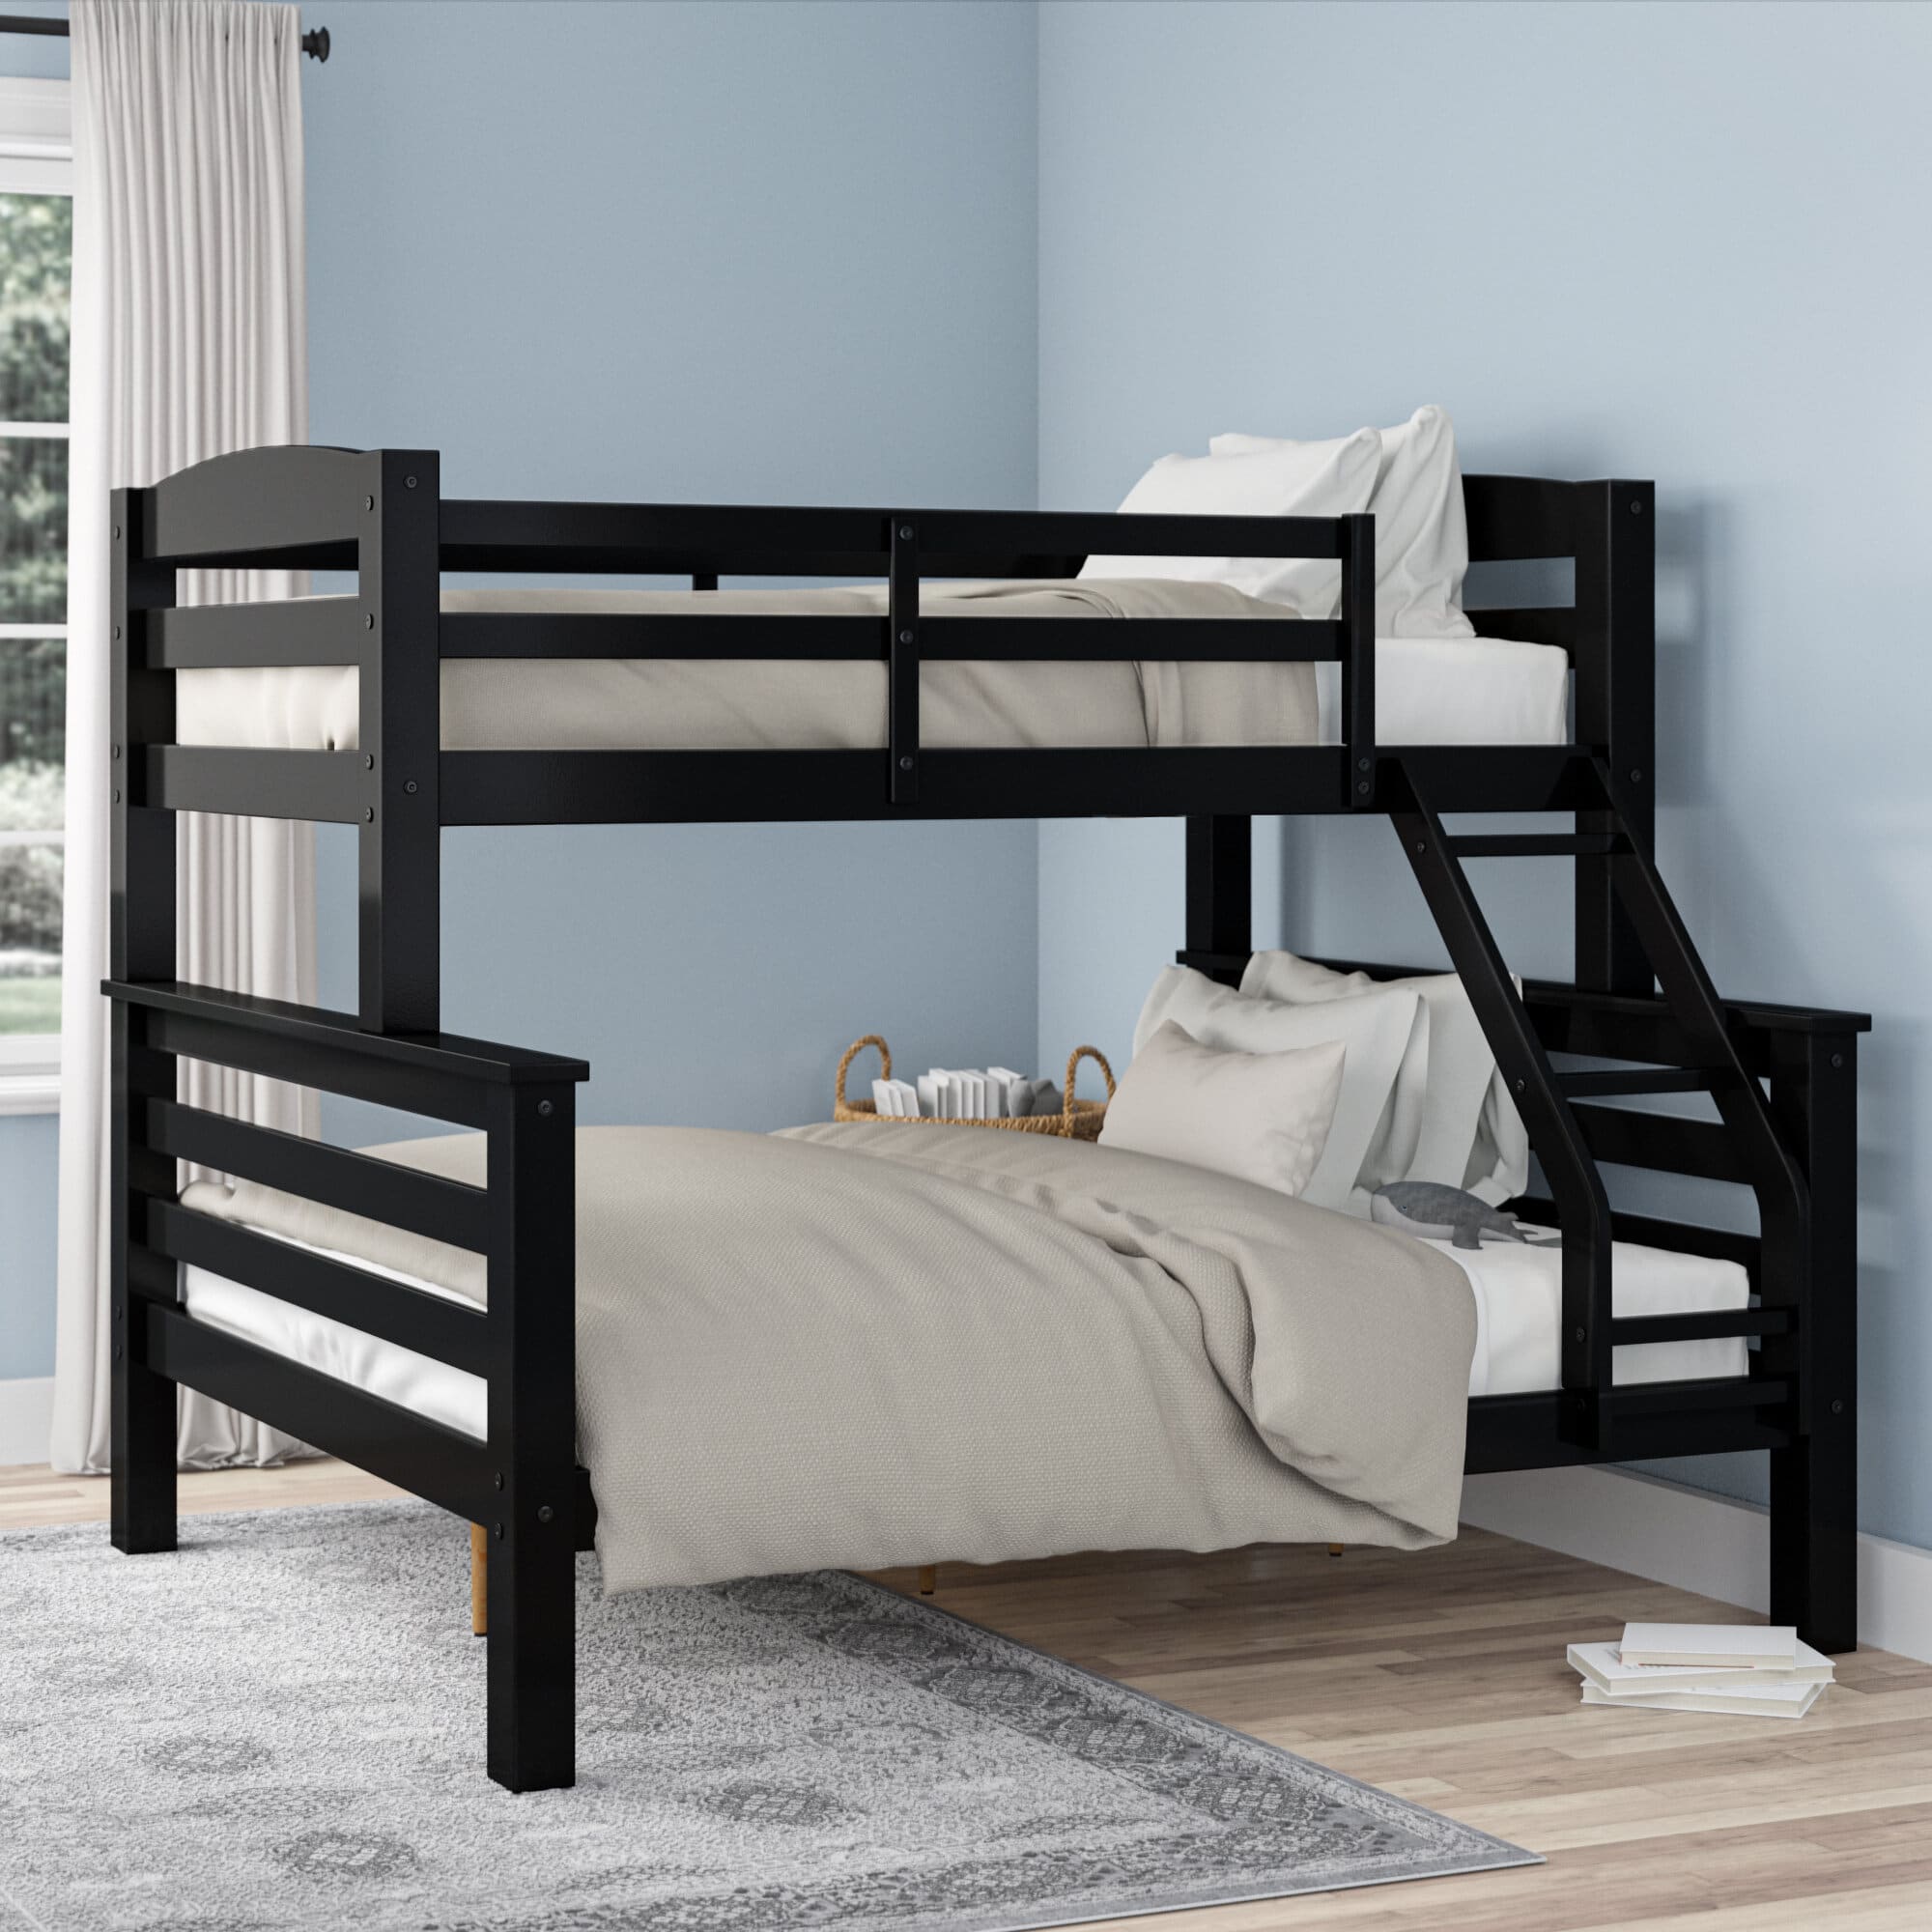 6 Best Twin Over Full Bunk Beds May, Wood Bunk Beds Twin Over Full